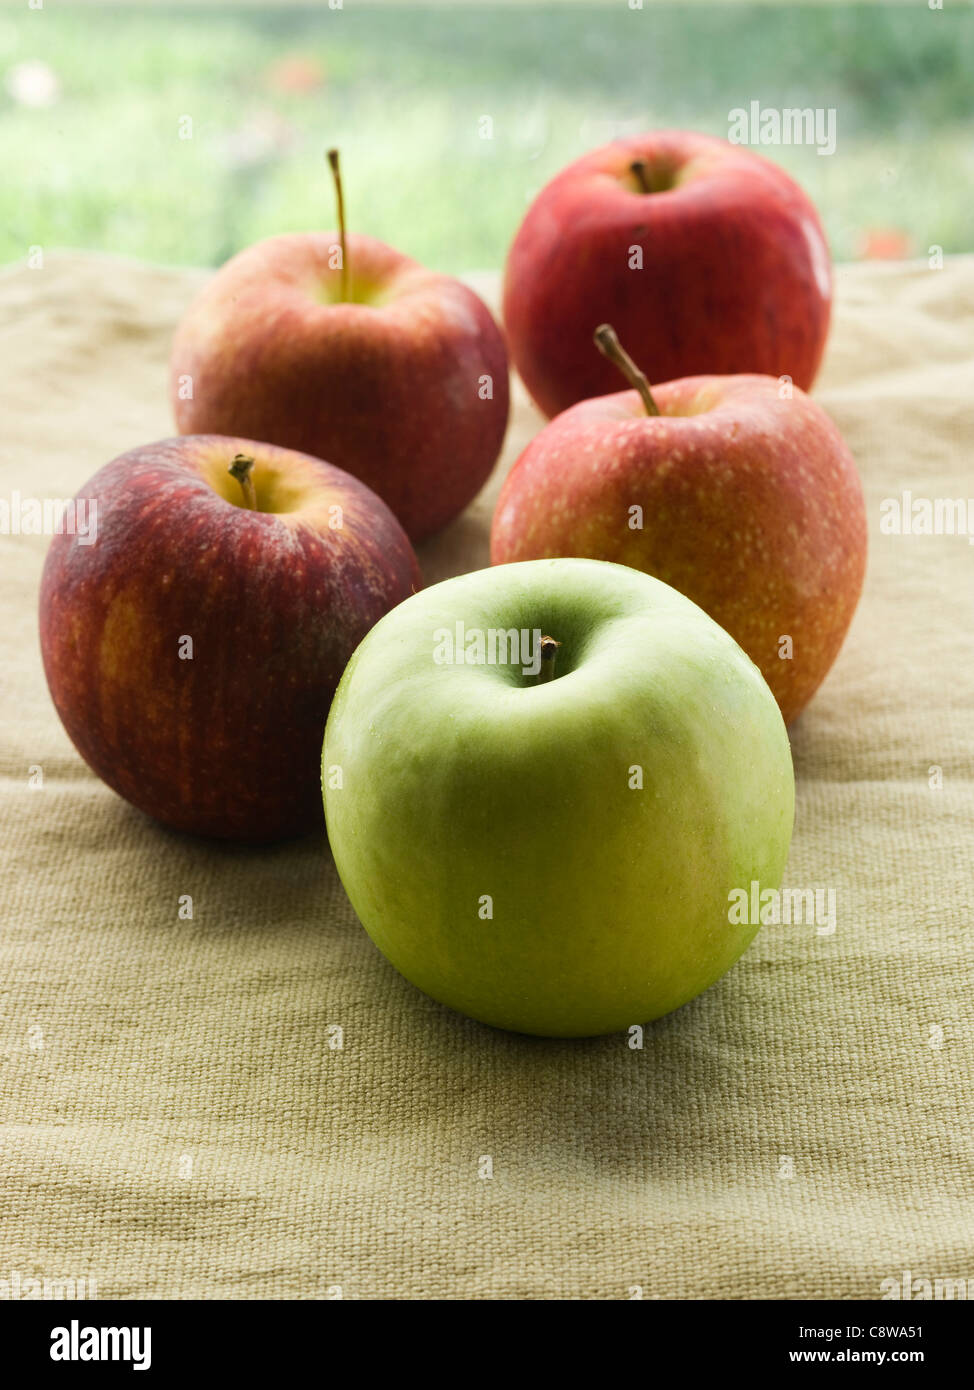 One green apple and four red apples Stock Photo